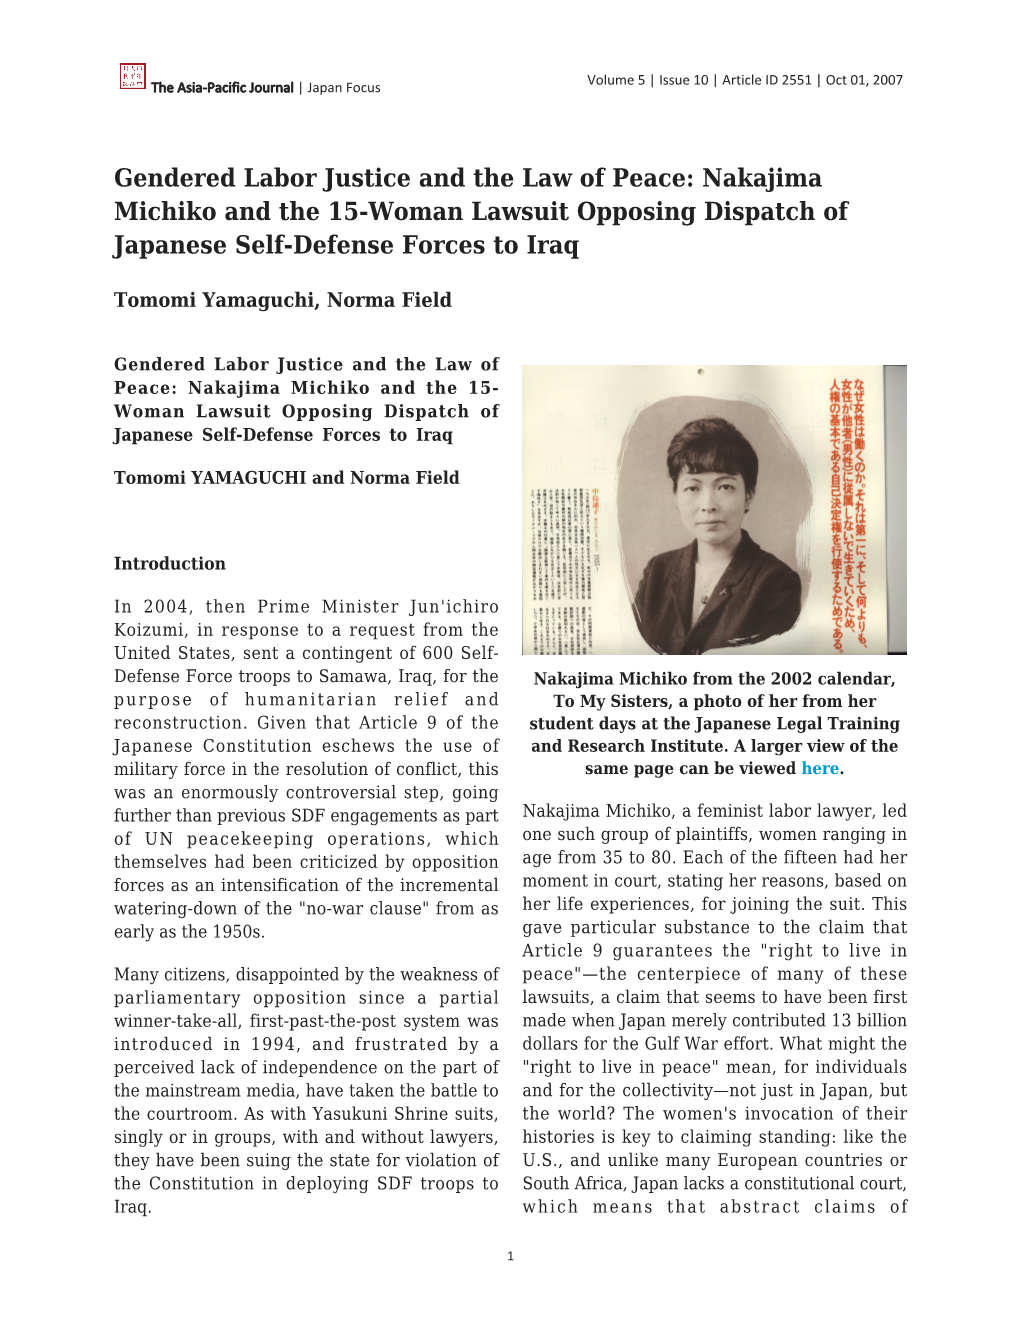 Nakajima Michiko and the 15-Woman Lawsuit Opposing Dispatch of Japanese Self-Defense Forces to Iraq